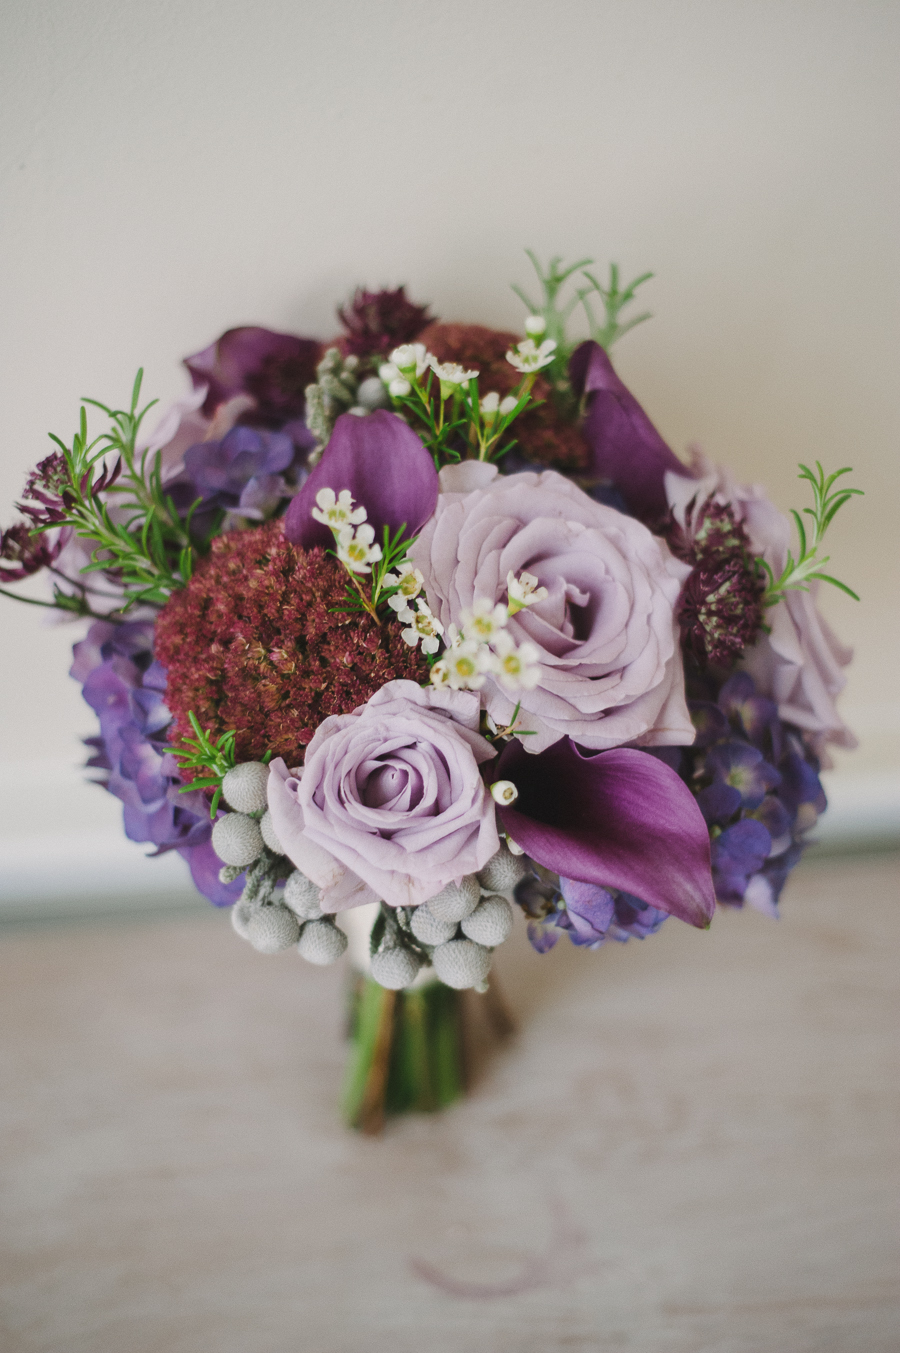 Wedding Flowers: Bouquets for Nassau Valley Vineyards in Lewes ...